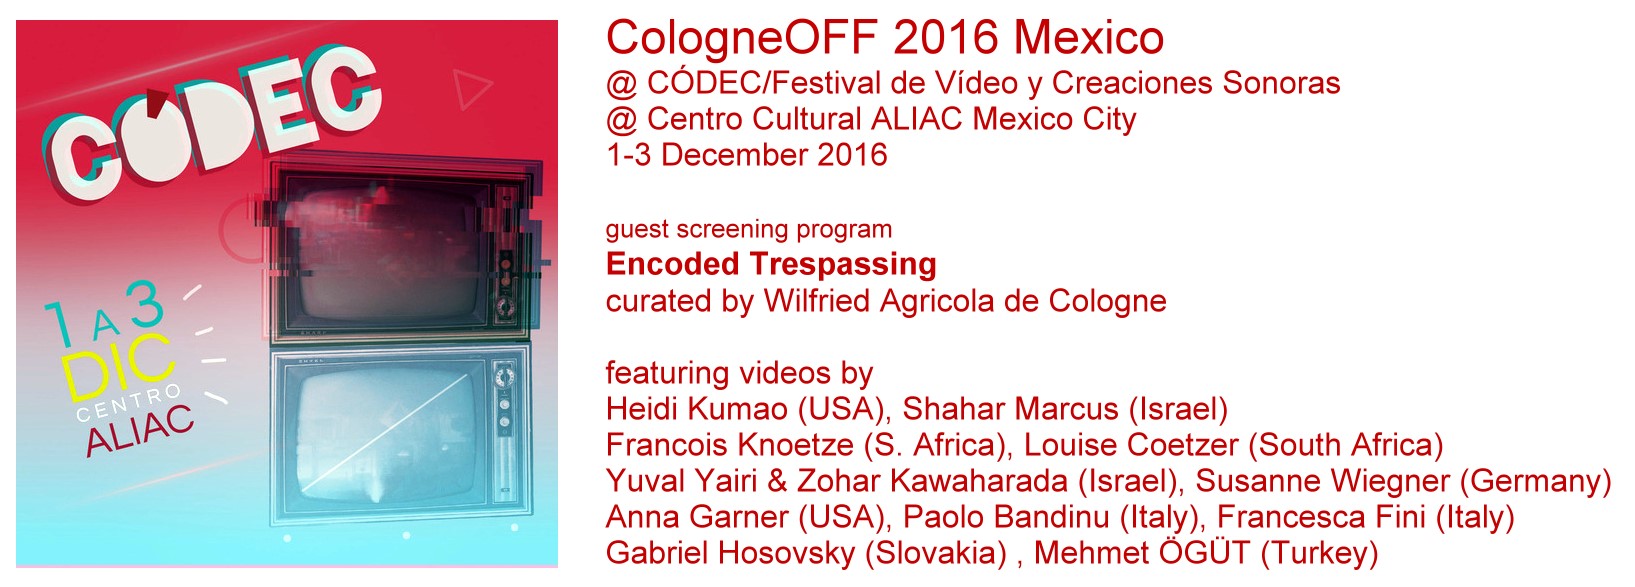 CologneOFF 2016 Mexico – 1-3 December